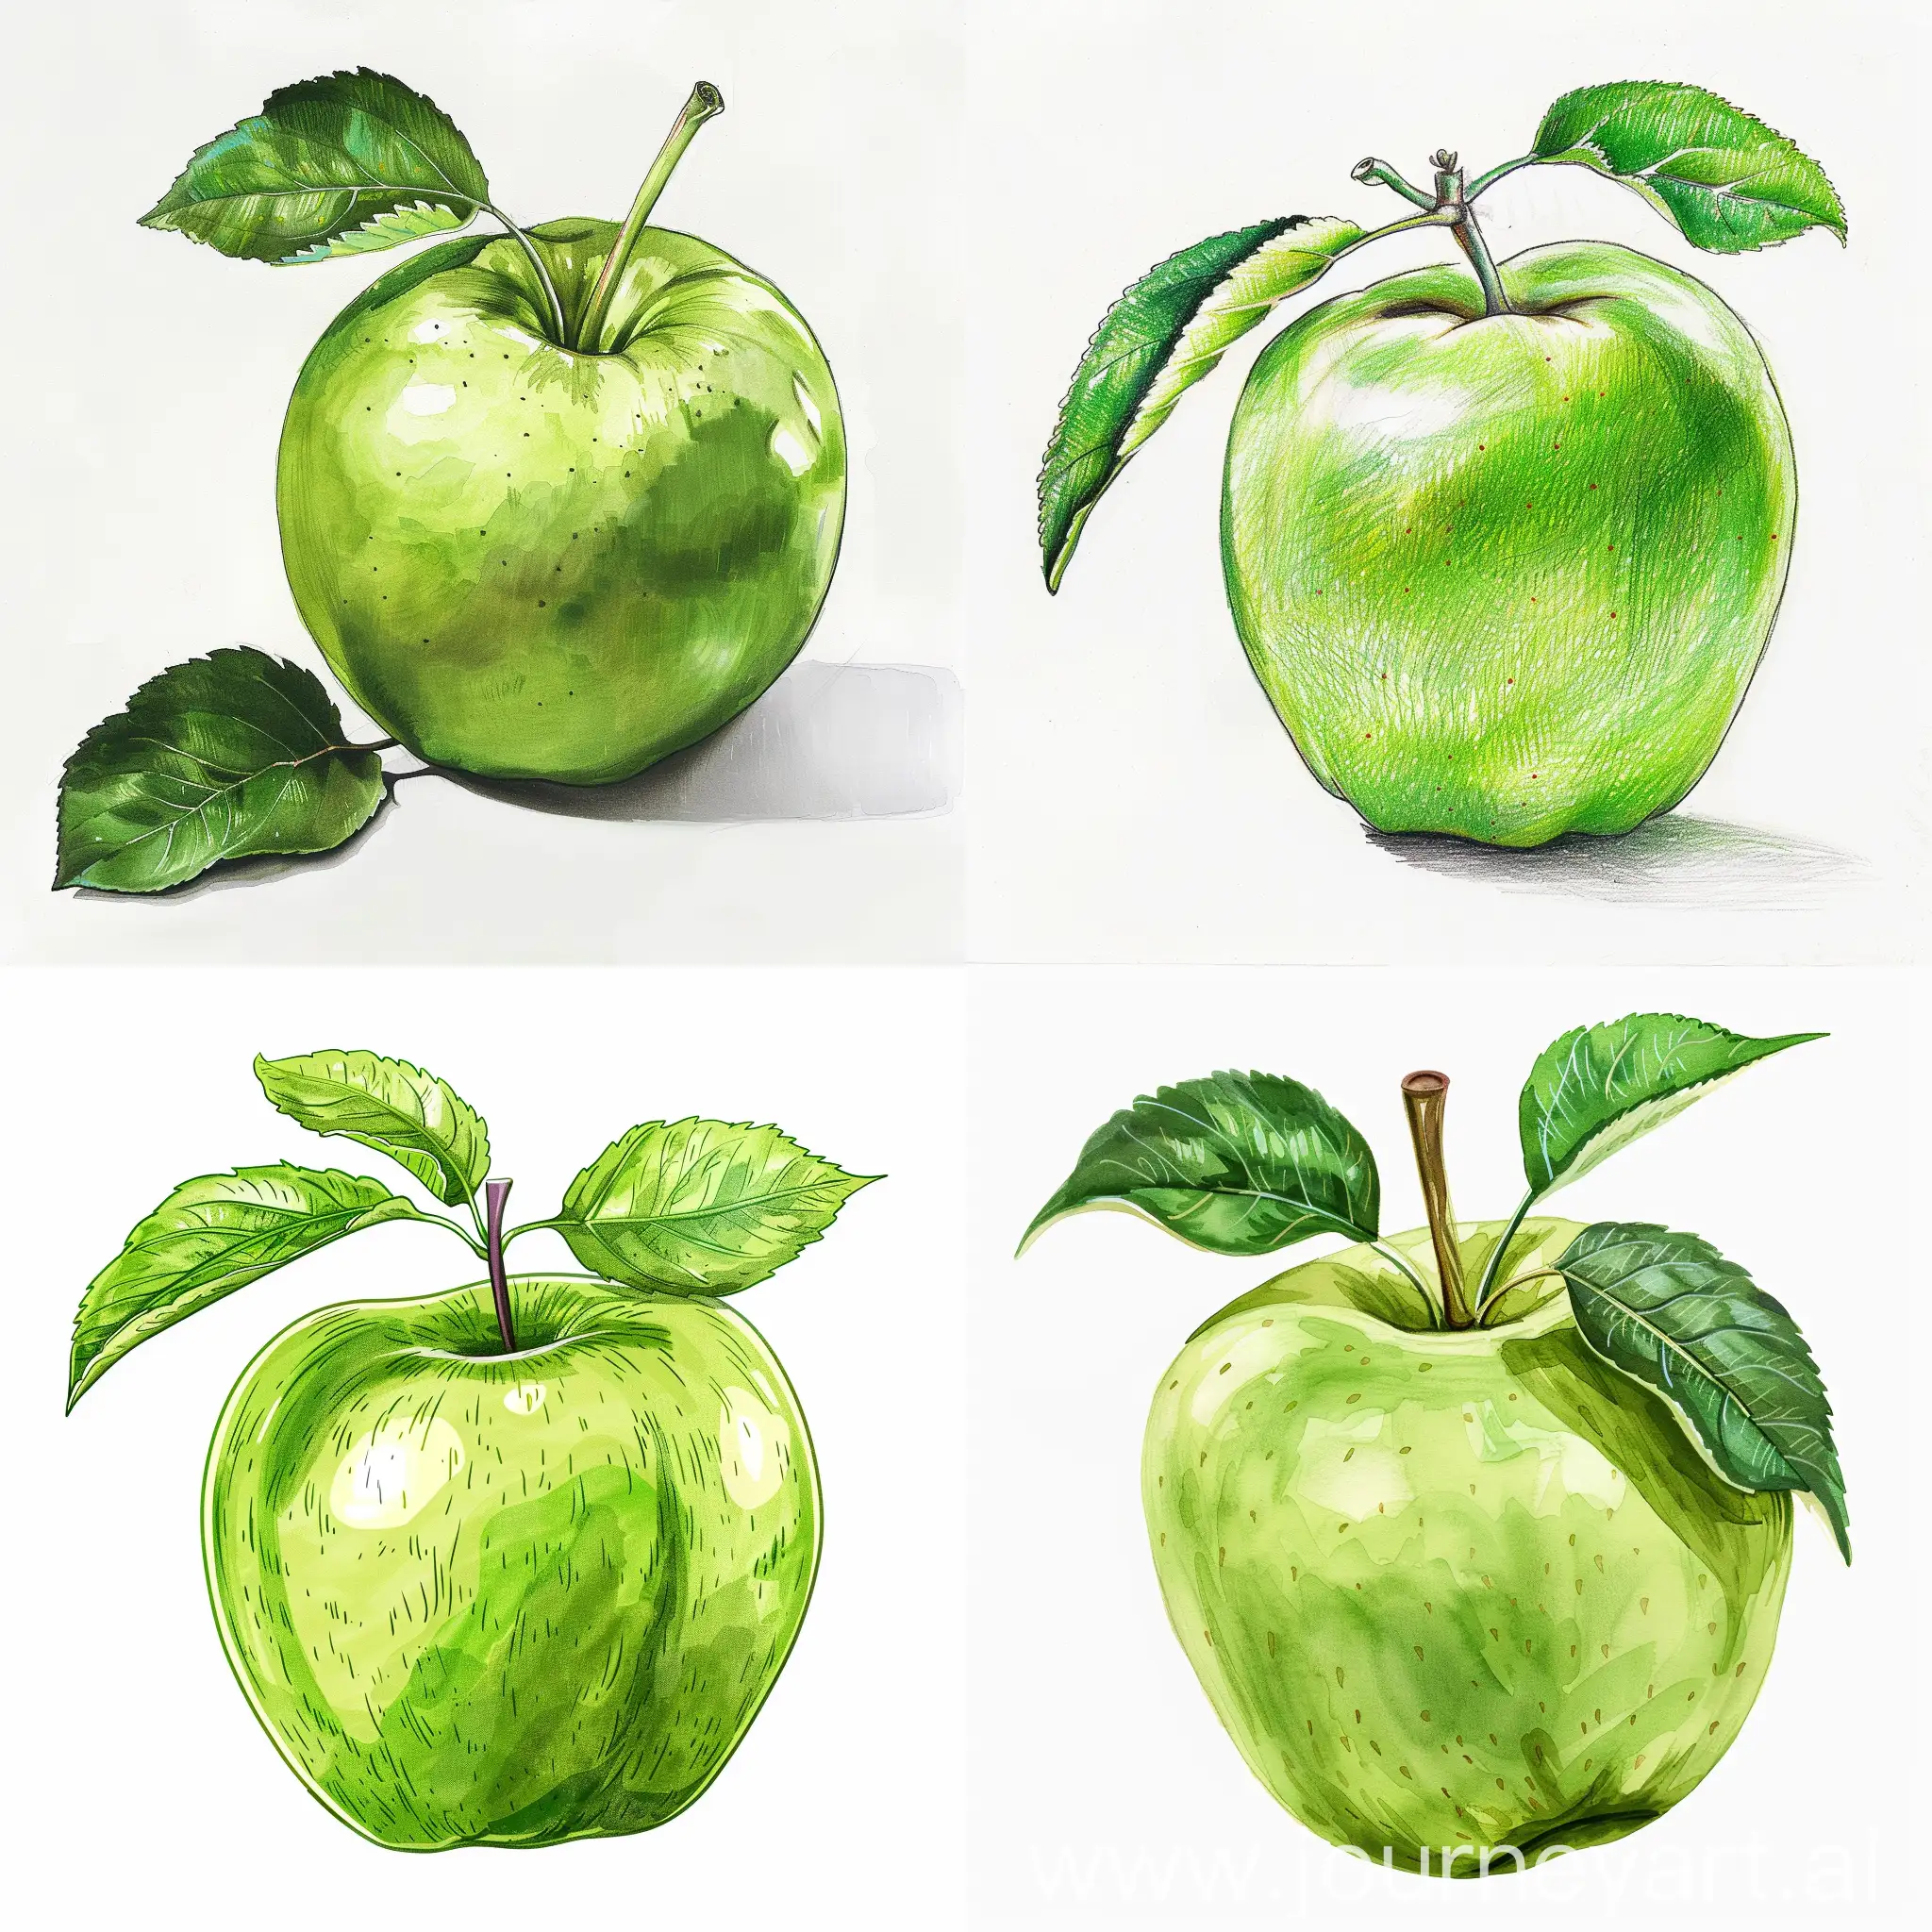 draw a green apple with leaves on a white background